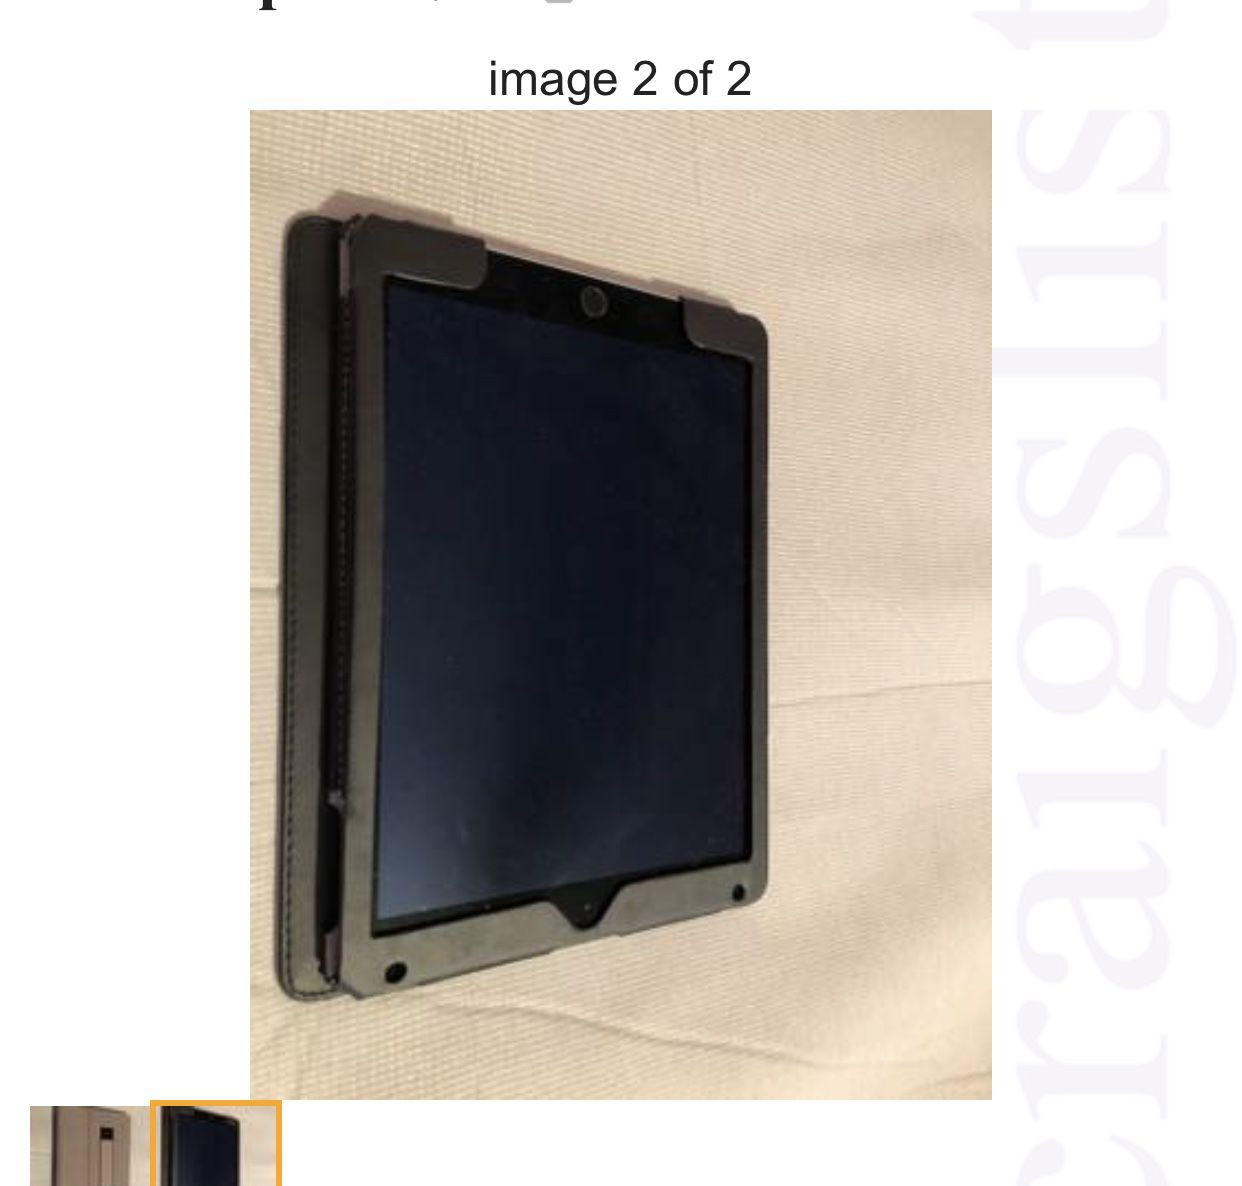 IPad Air 2 trade for pressure washer